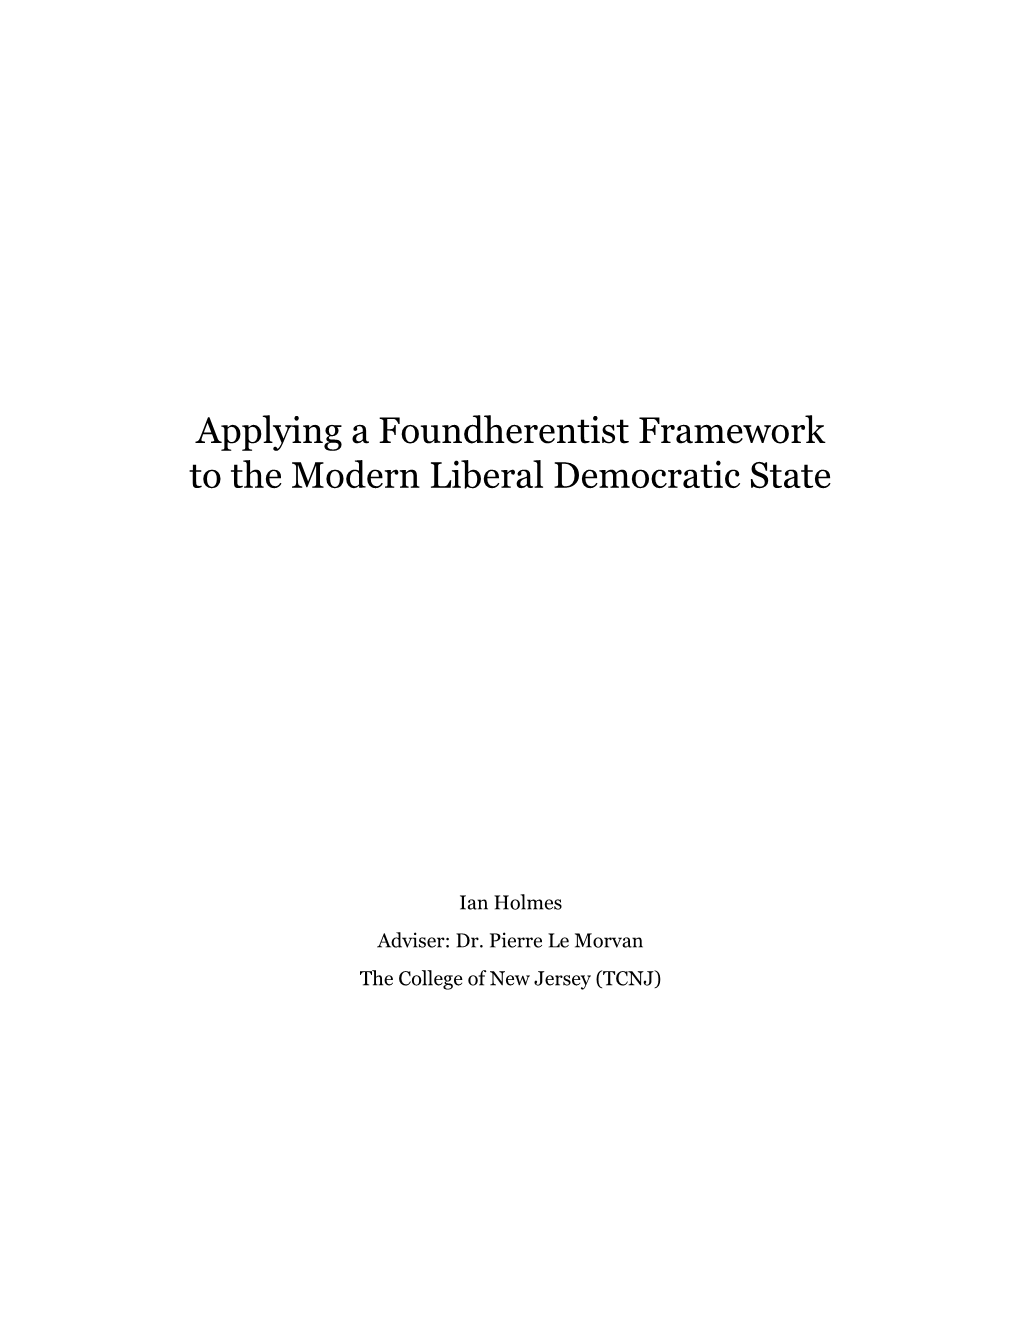 A Foundherentist Framework for the Modern Liberal Democratic State